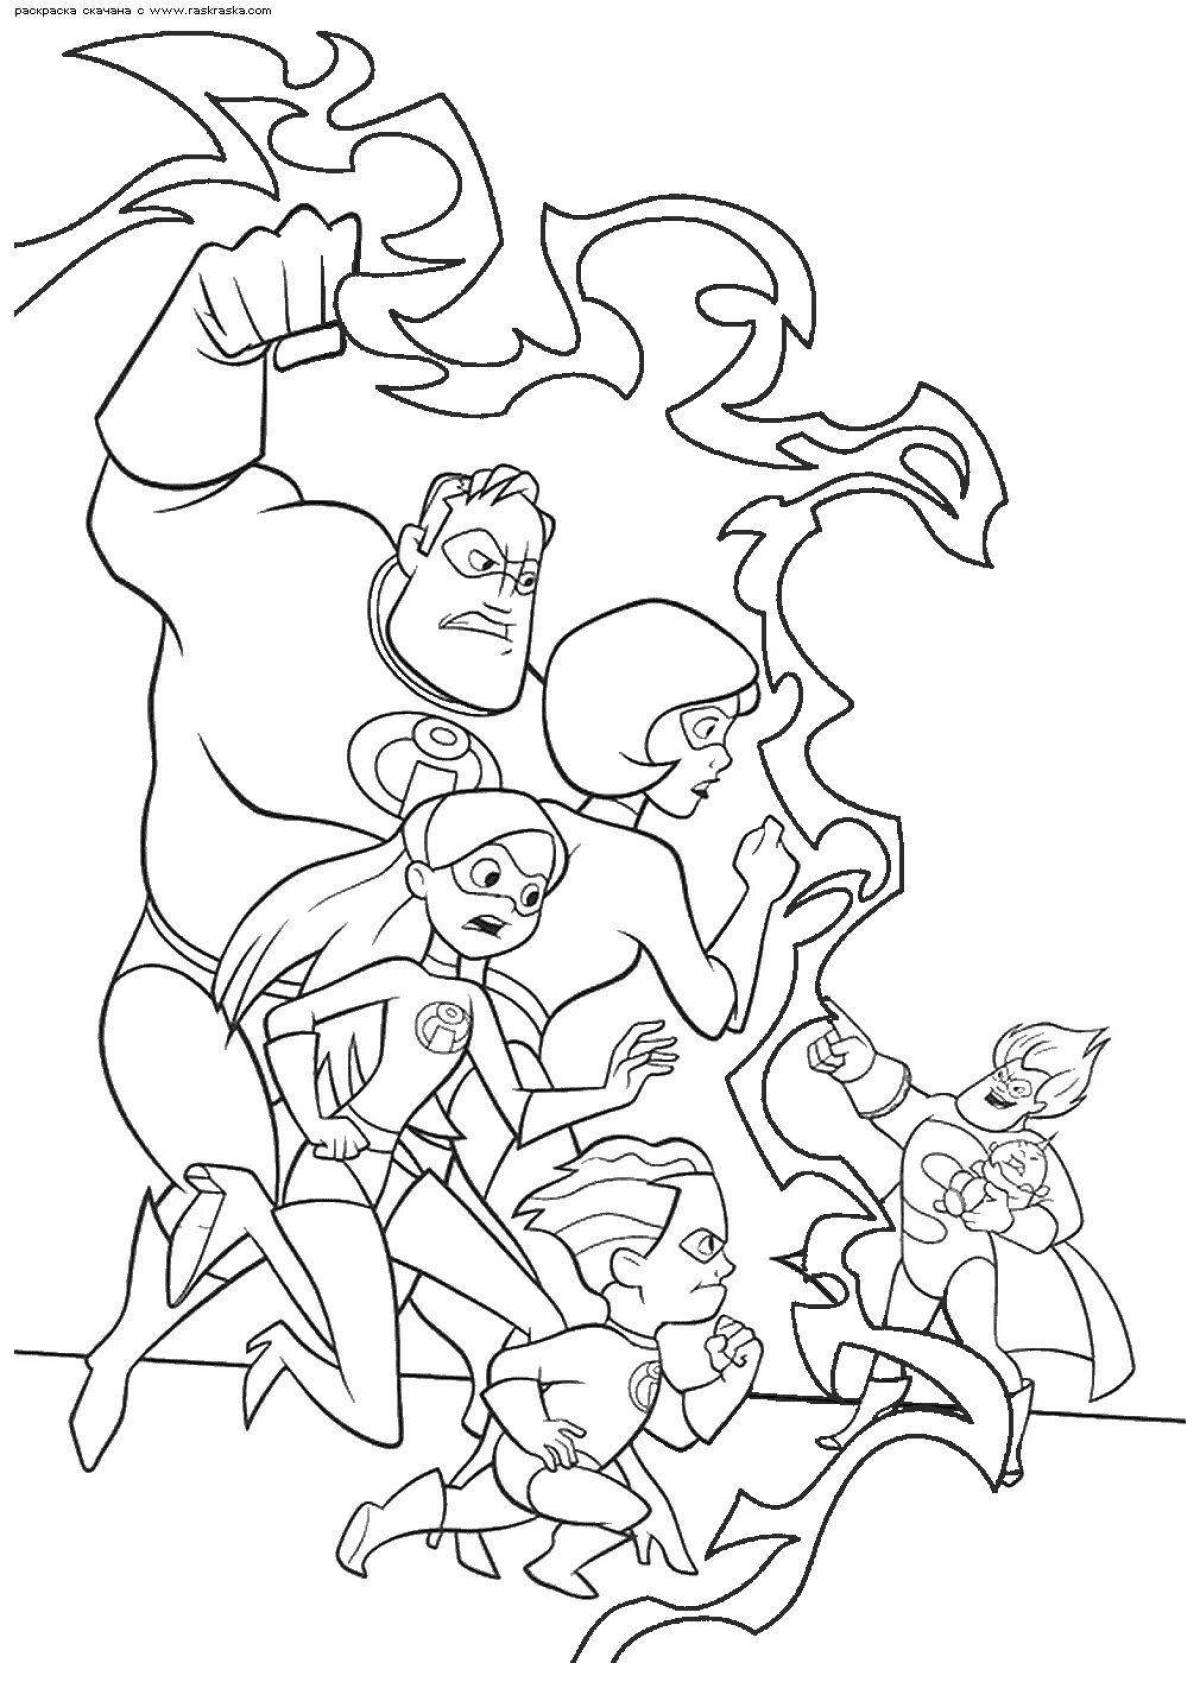 Colorful Incredibles coloring pages for kids